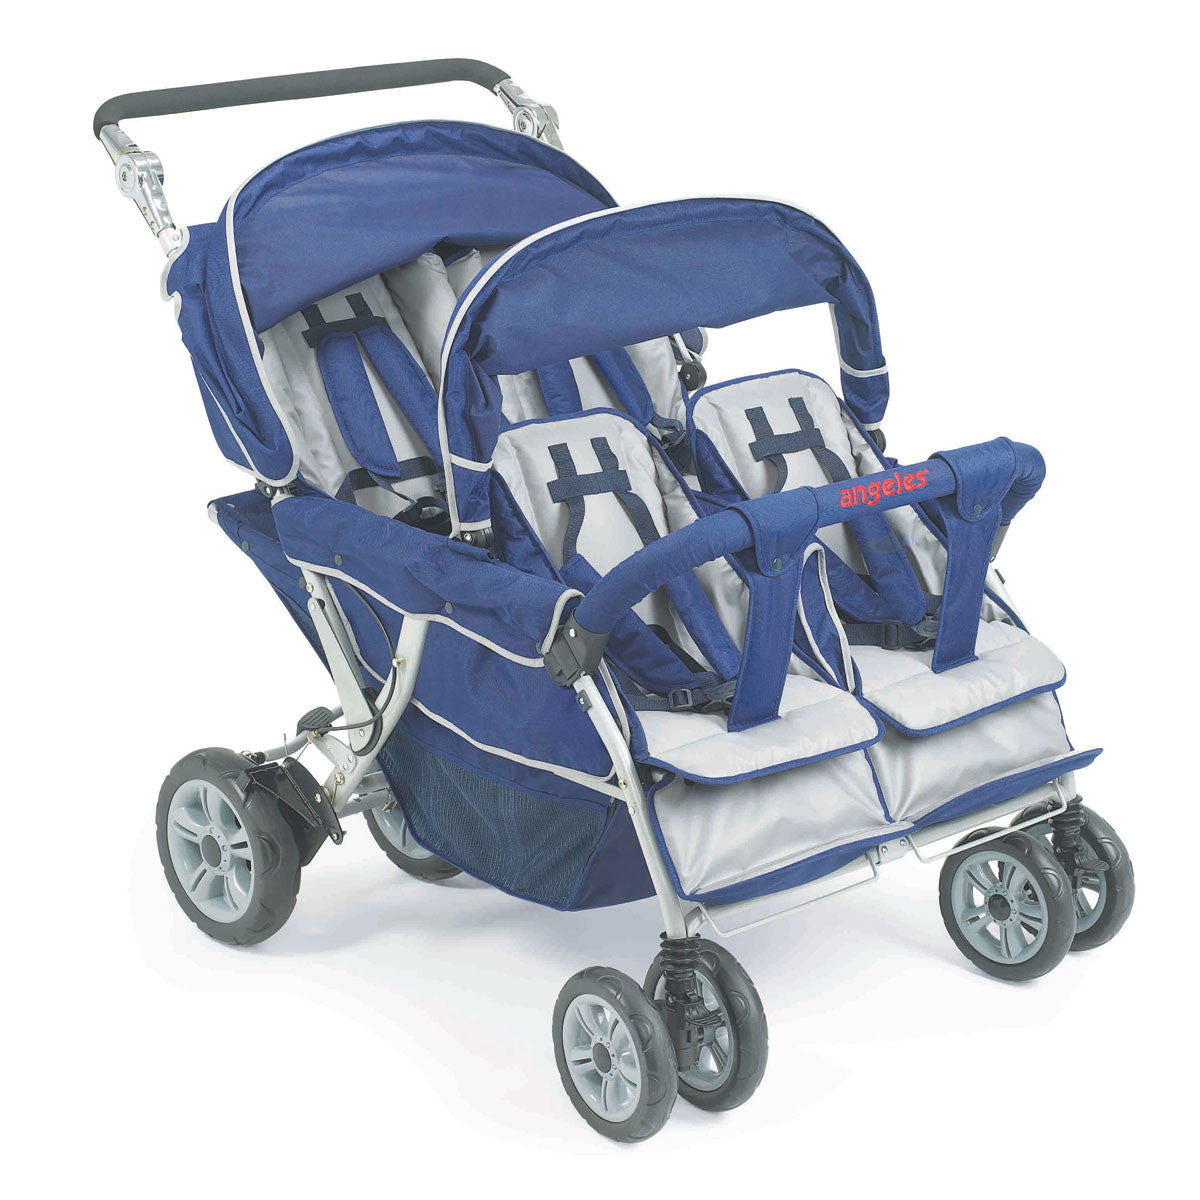 4 in 1 pushchairs